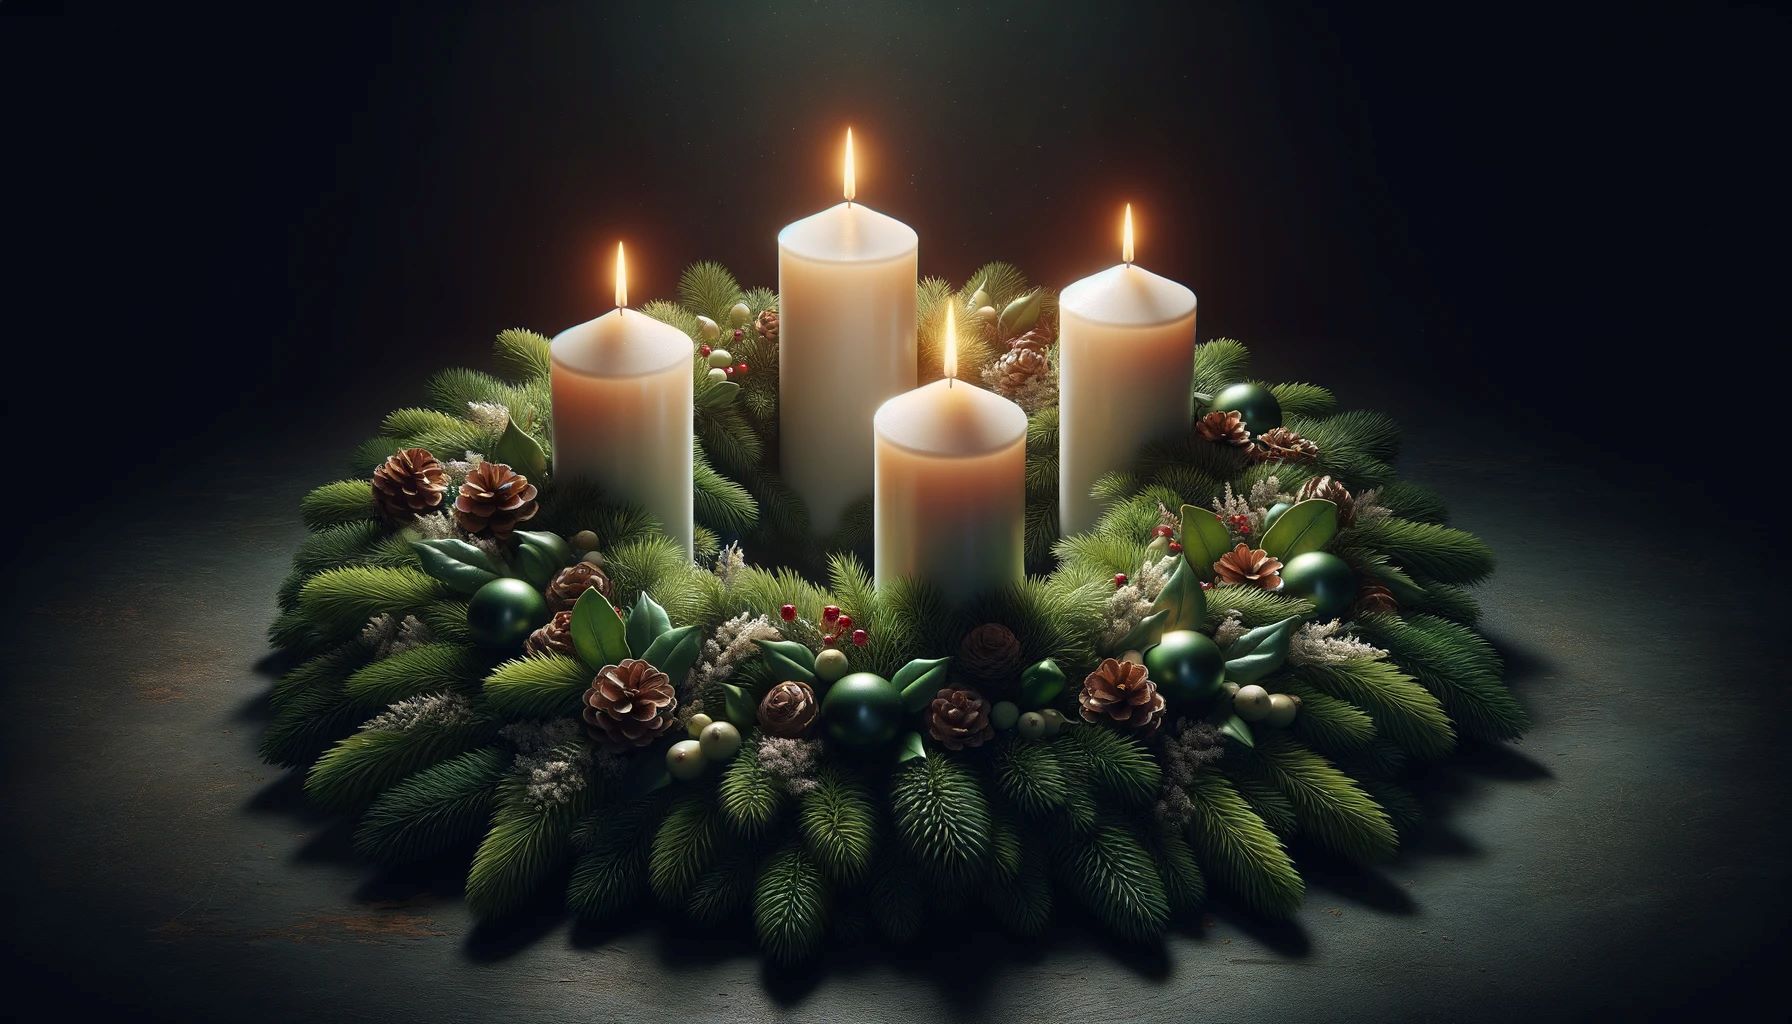 What Does Advent Mean In The Catholic Religion